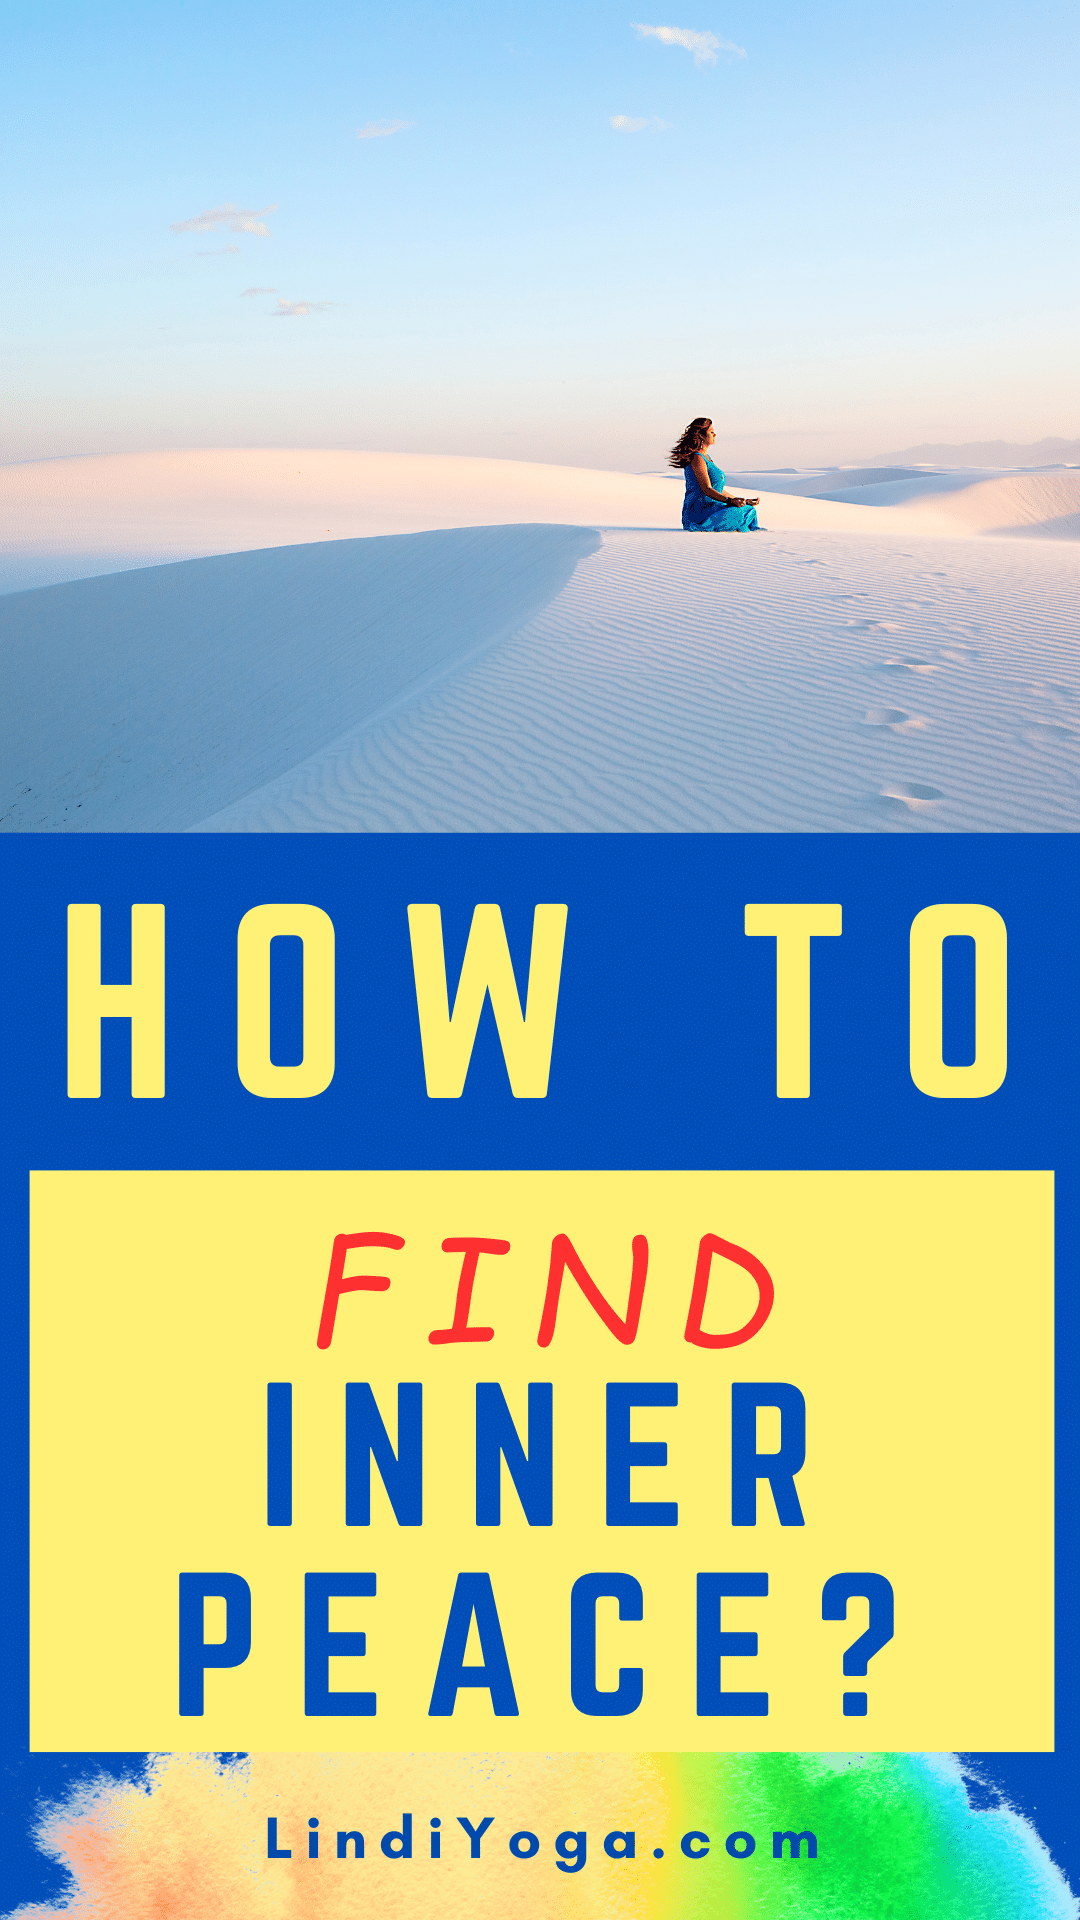 How To Find Inner Peace / Canva